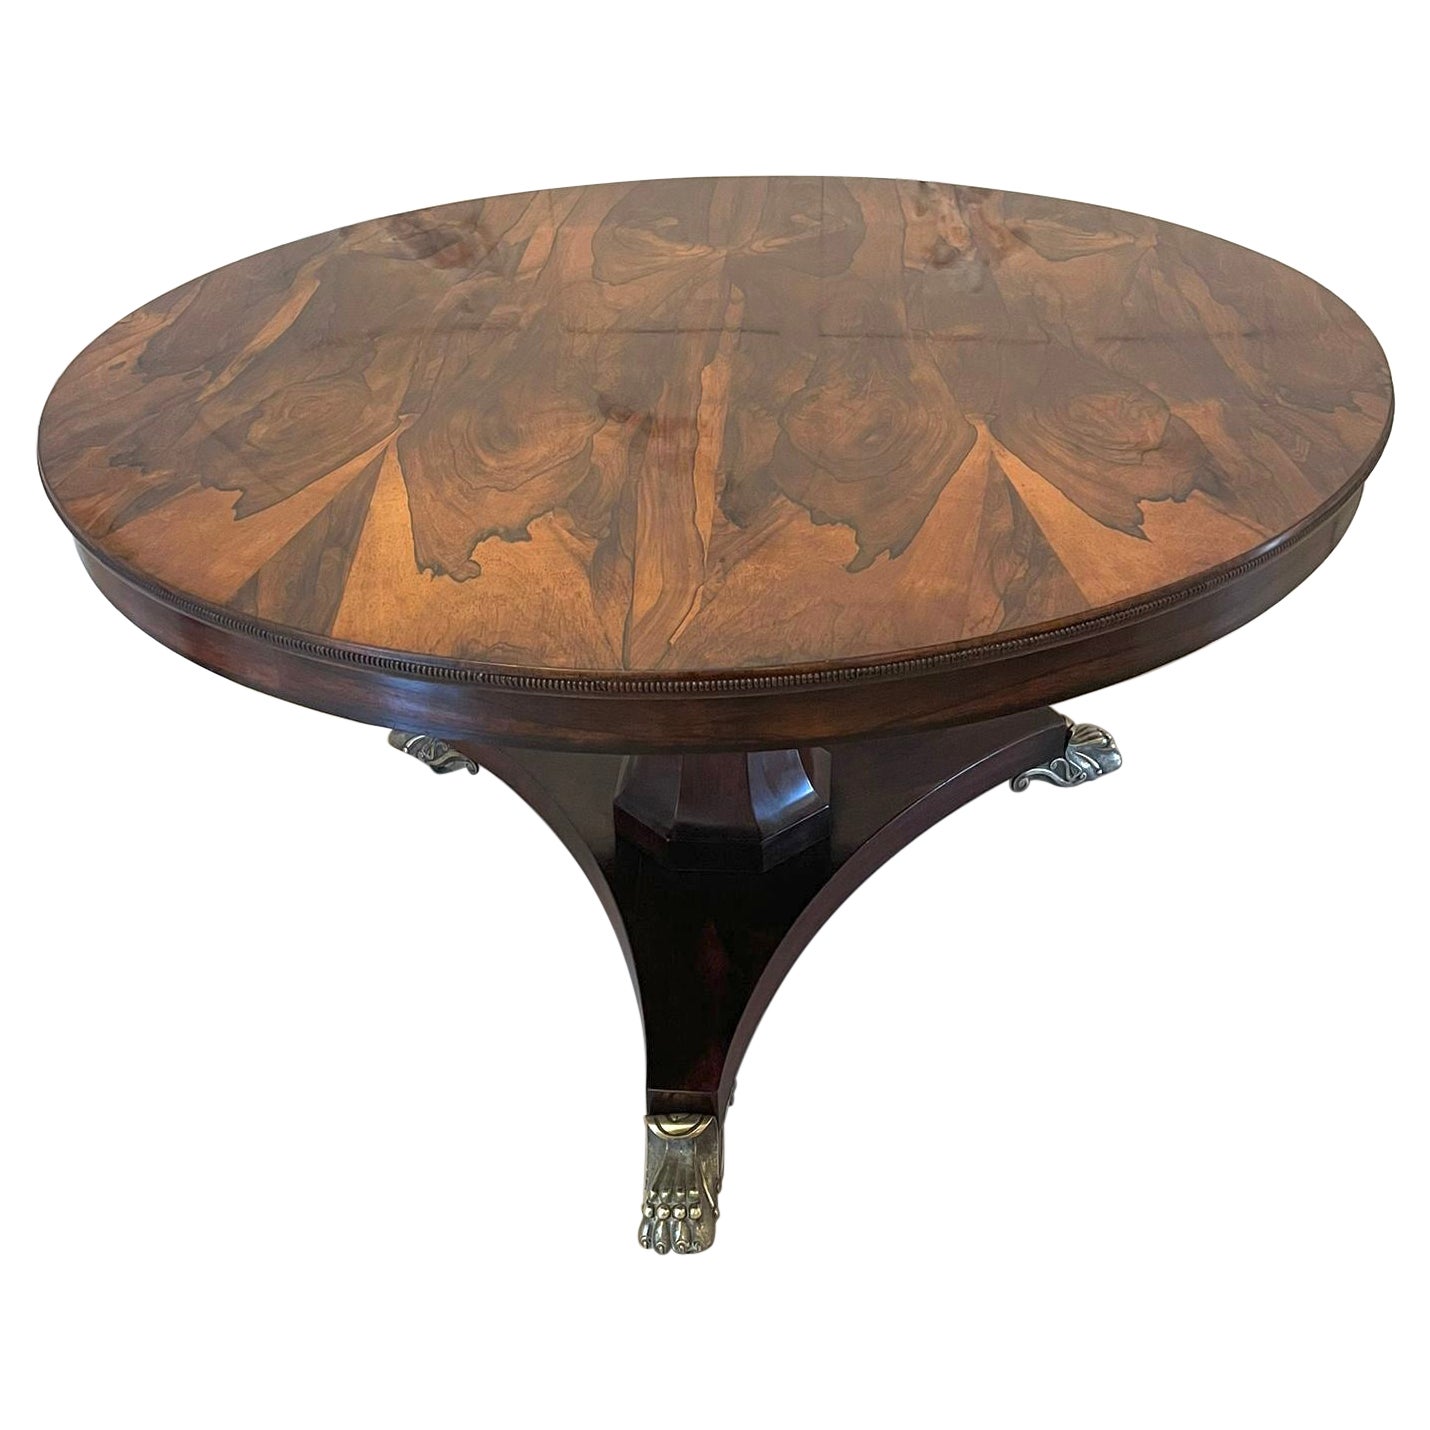 Outstanding quality antique Regency rosewood circular centre table with bronze feet having an magnificent quality circular rosewood tilt top centre table with a beaded edge supported by a hexagonal shaped pedestal column and standing on a shaped